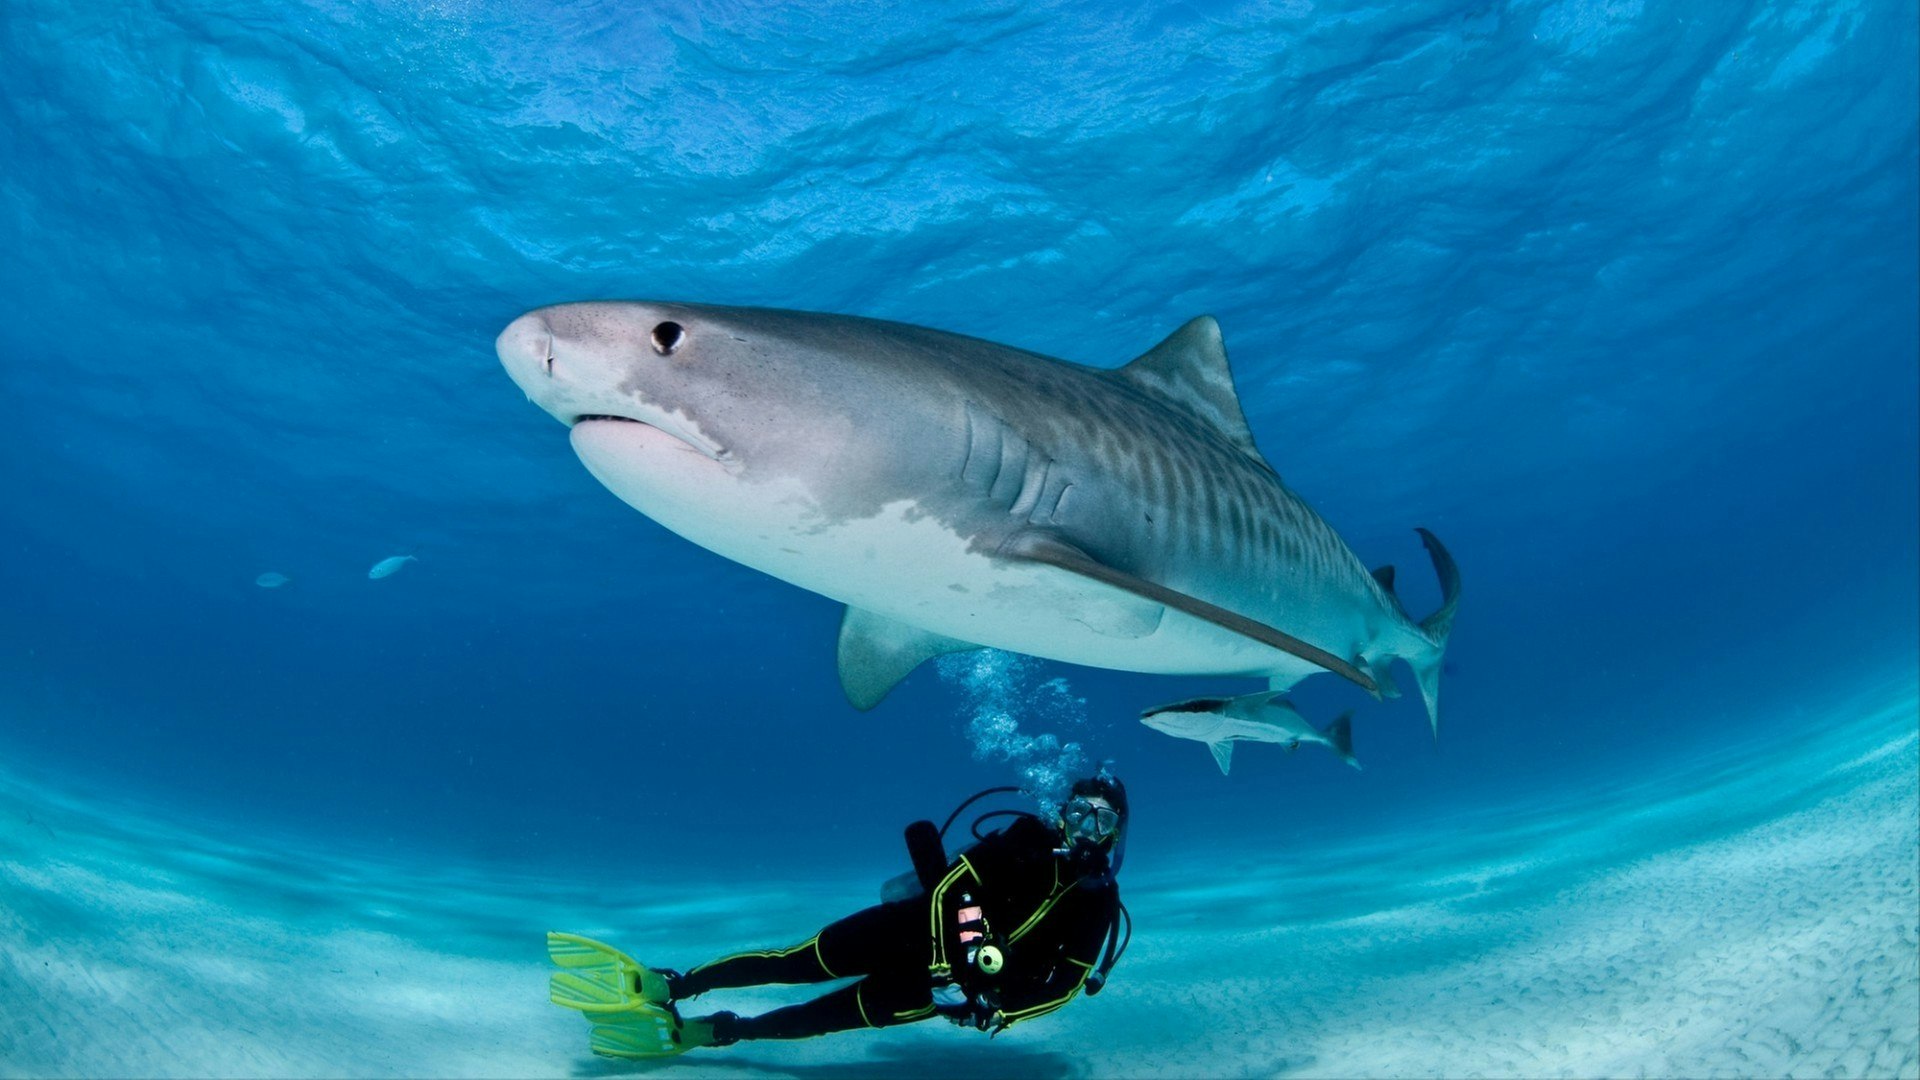 Tiger shark glides over the top of a diver, flashing his metallic stripes.